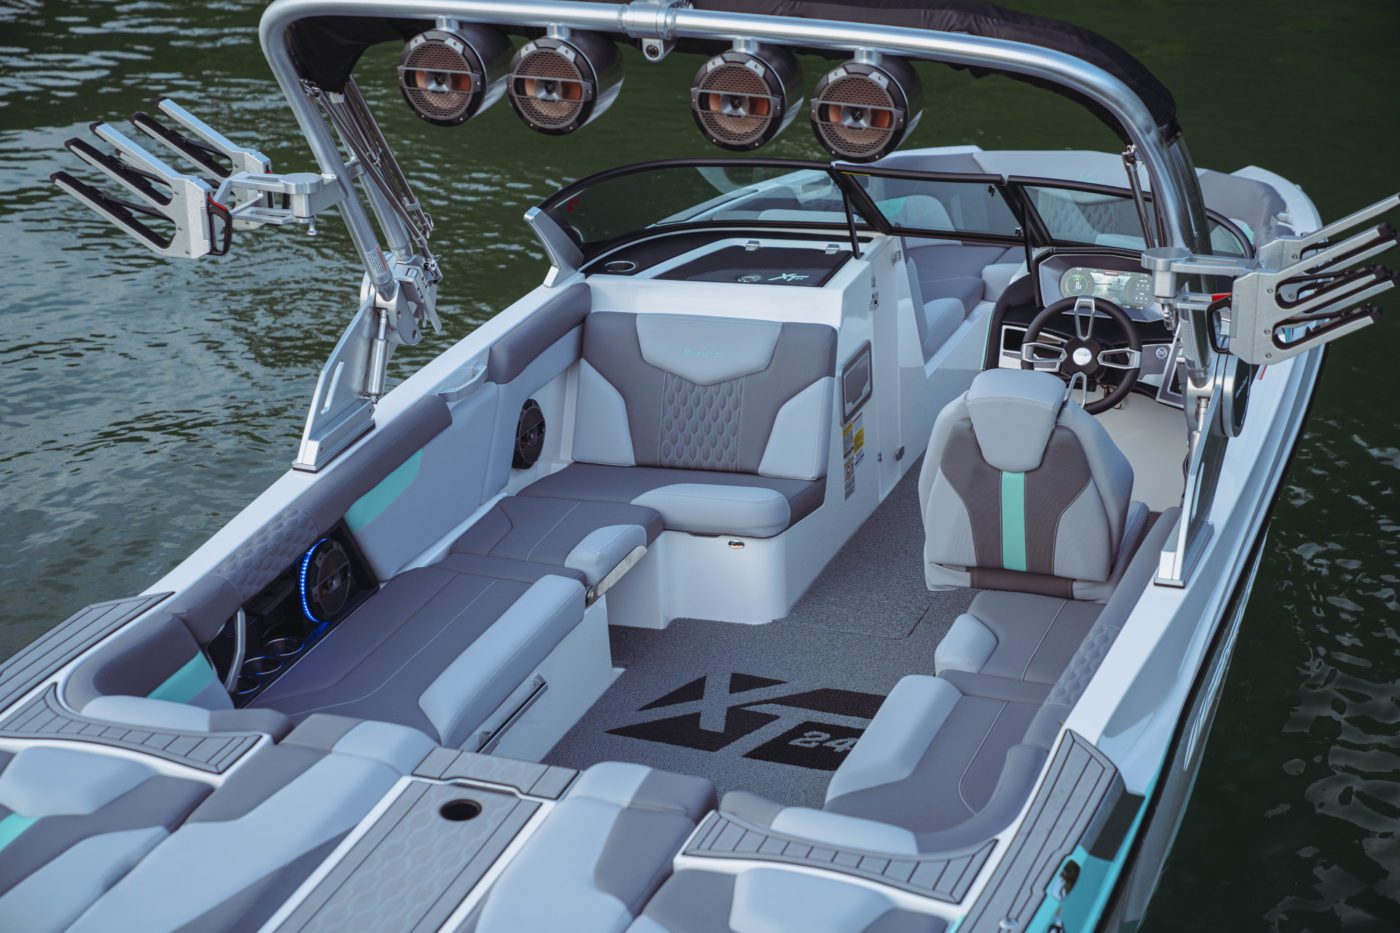 An empty boat showing the specs of a 2023 MasterCraft XT24